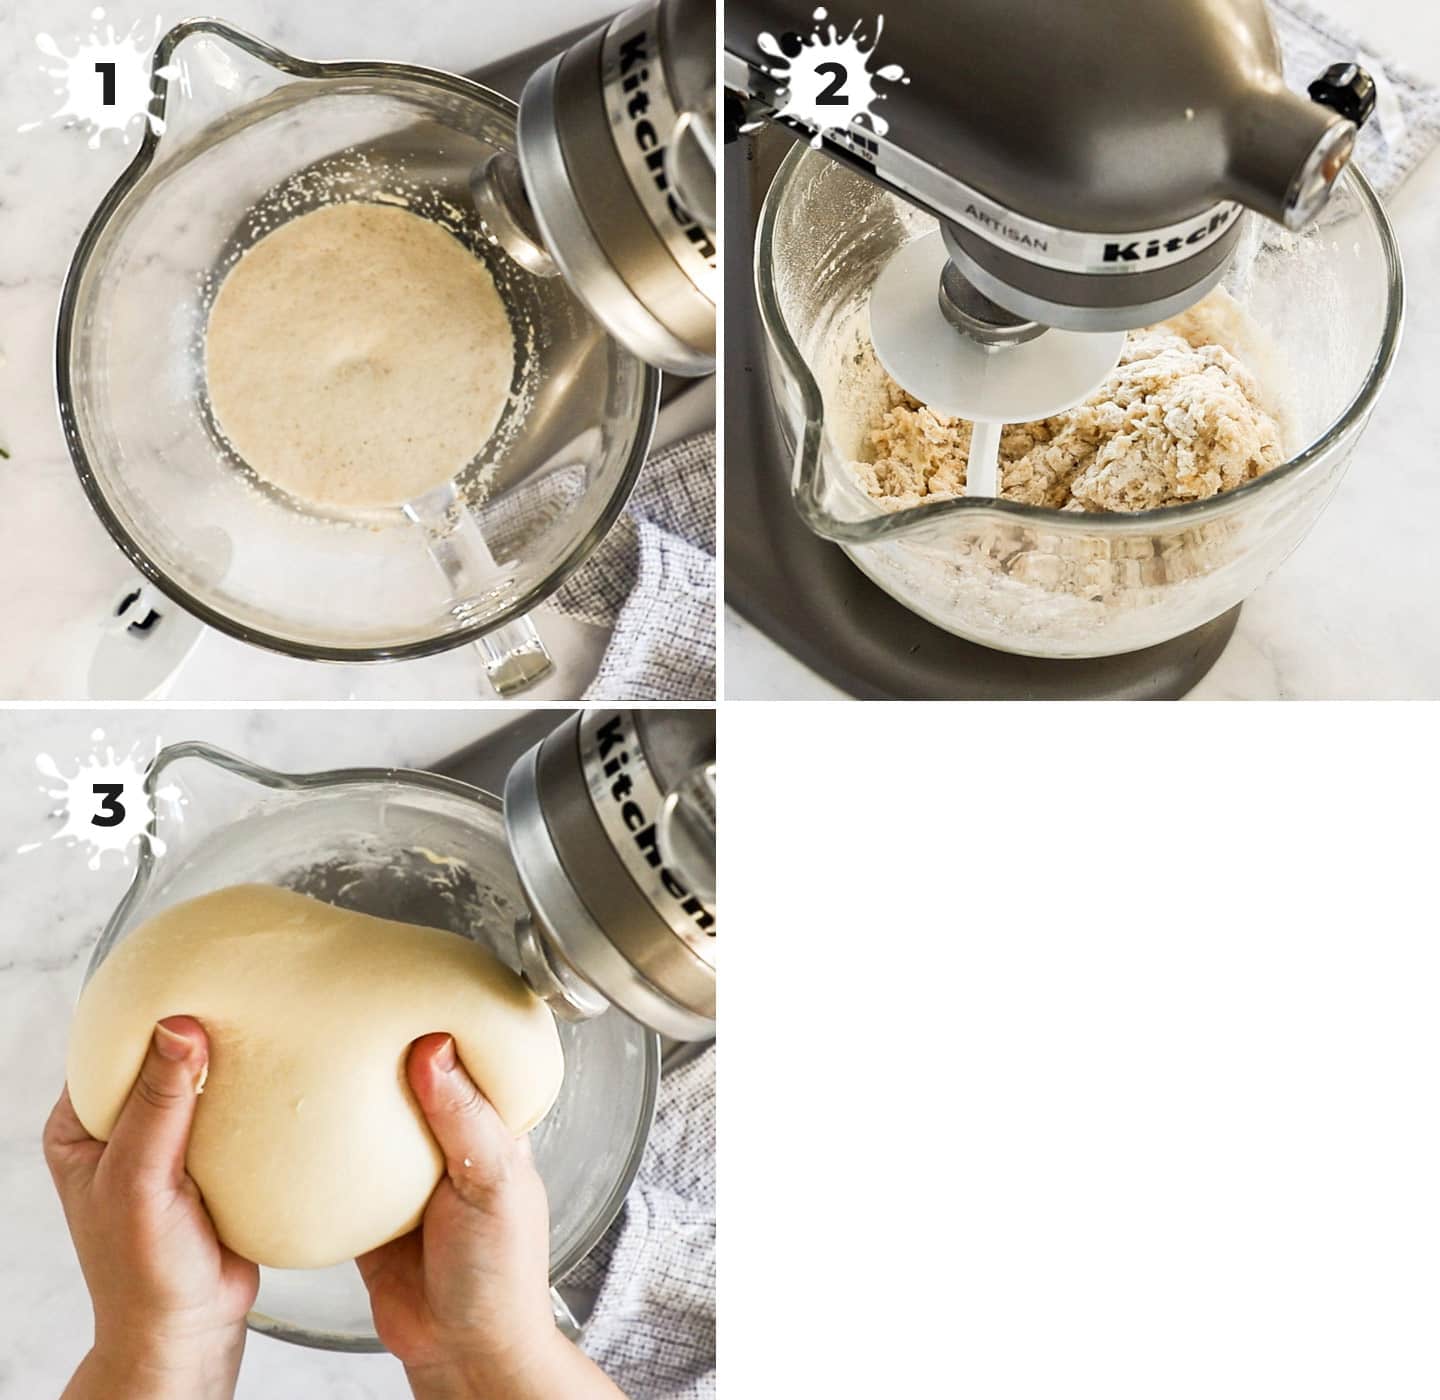 Showing how to mix the dough.